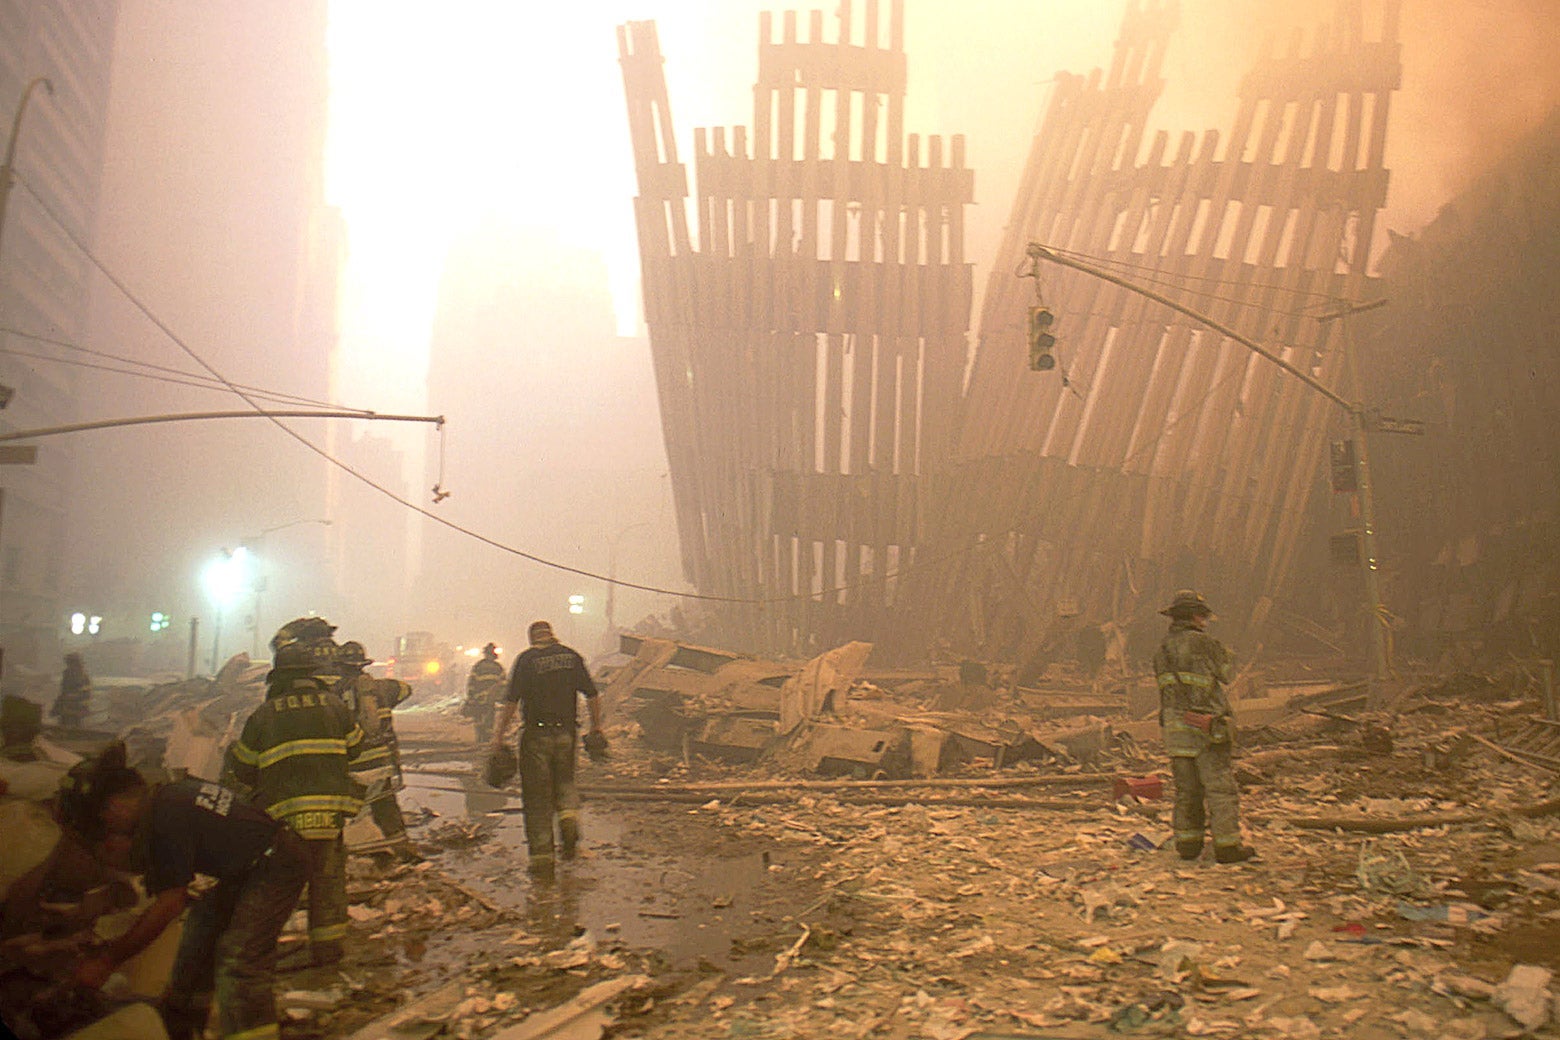 Rescue crews engulfed in a fog of dust set in the World Trade Center rubble